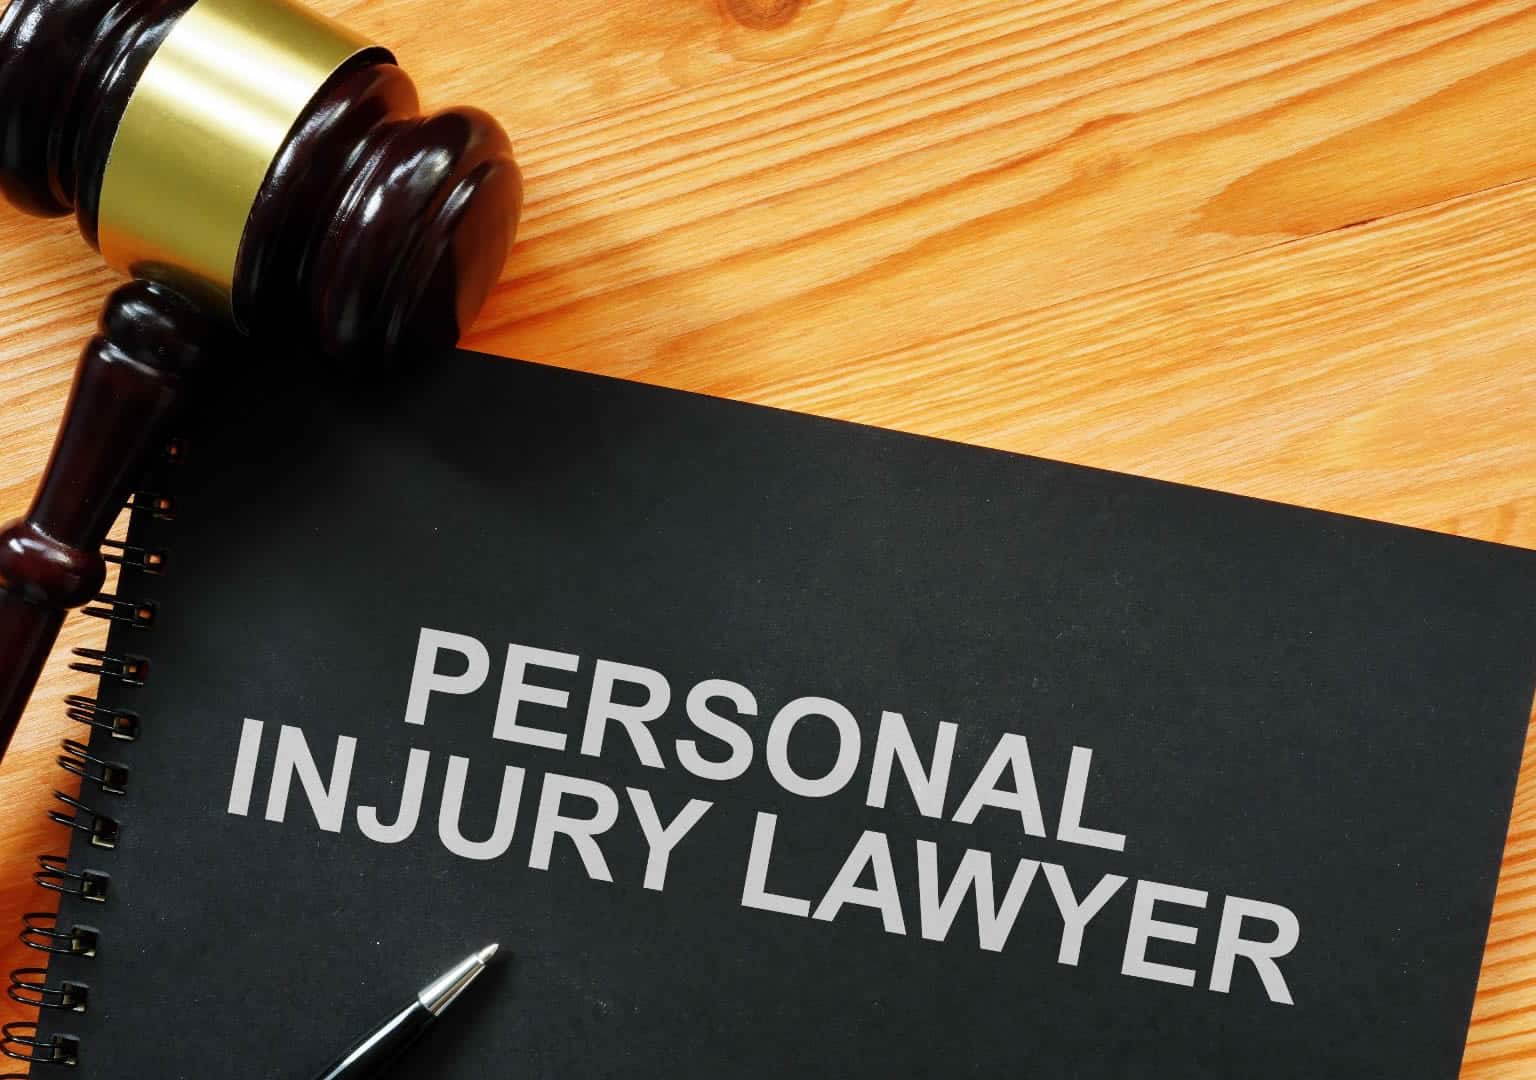 Personal Injury Lawyers for Nassau and Suffolk Counties LI, New York.